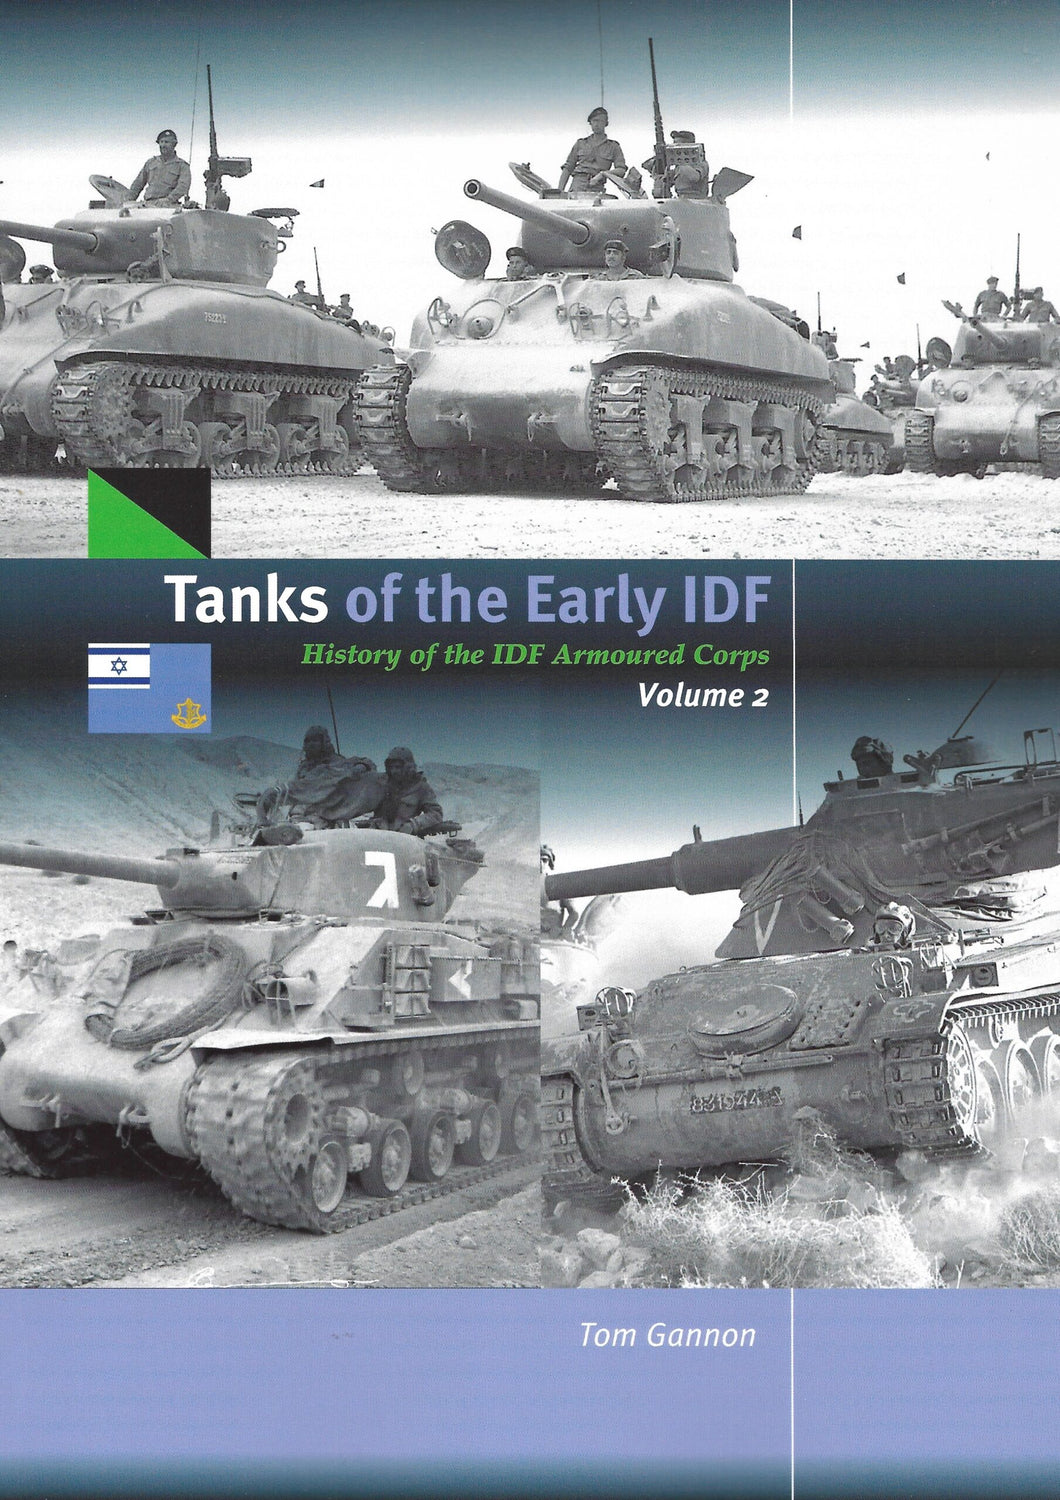 Tanks of the Early IDF Volume 2